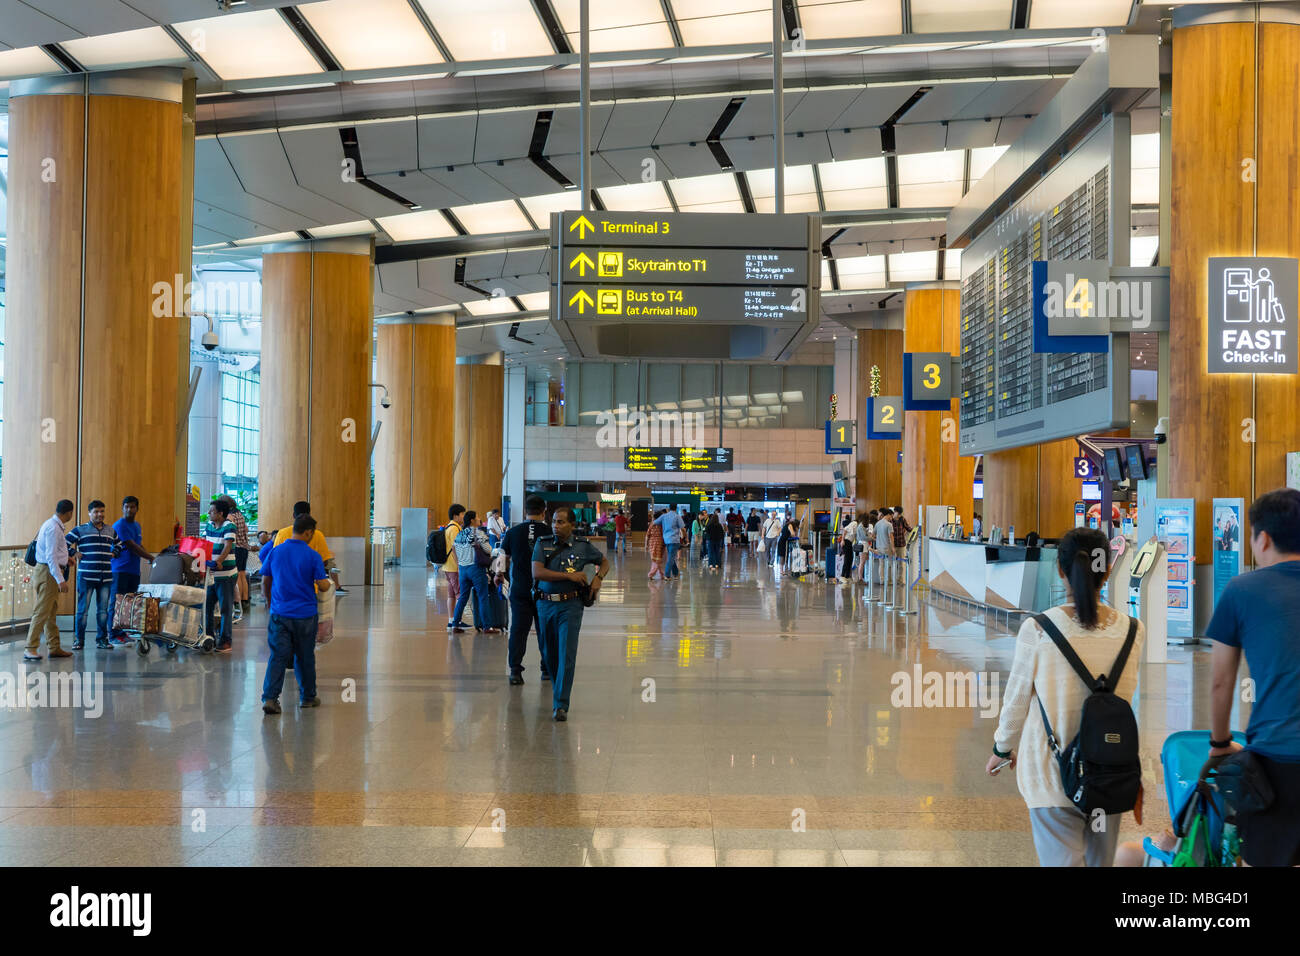 Singapore - January 6, 2018: Visitors walk around Departure Hall in Changi Airport. It has 3 passenger terminals, one of the largest transportation hu Stock Photo